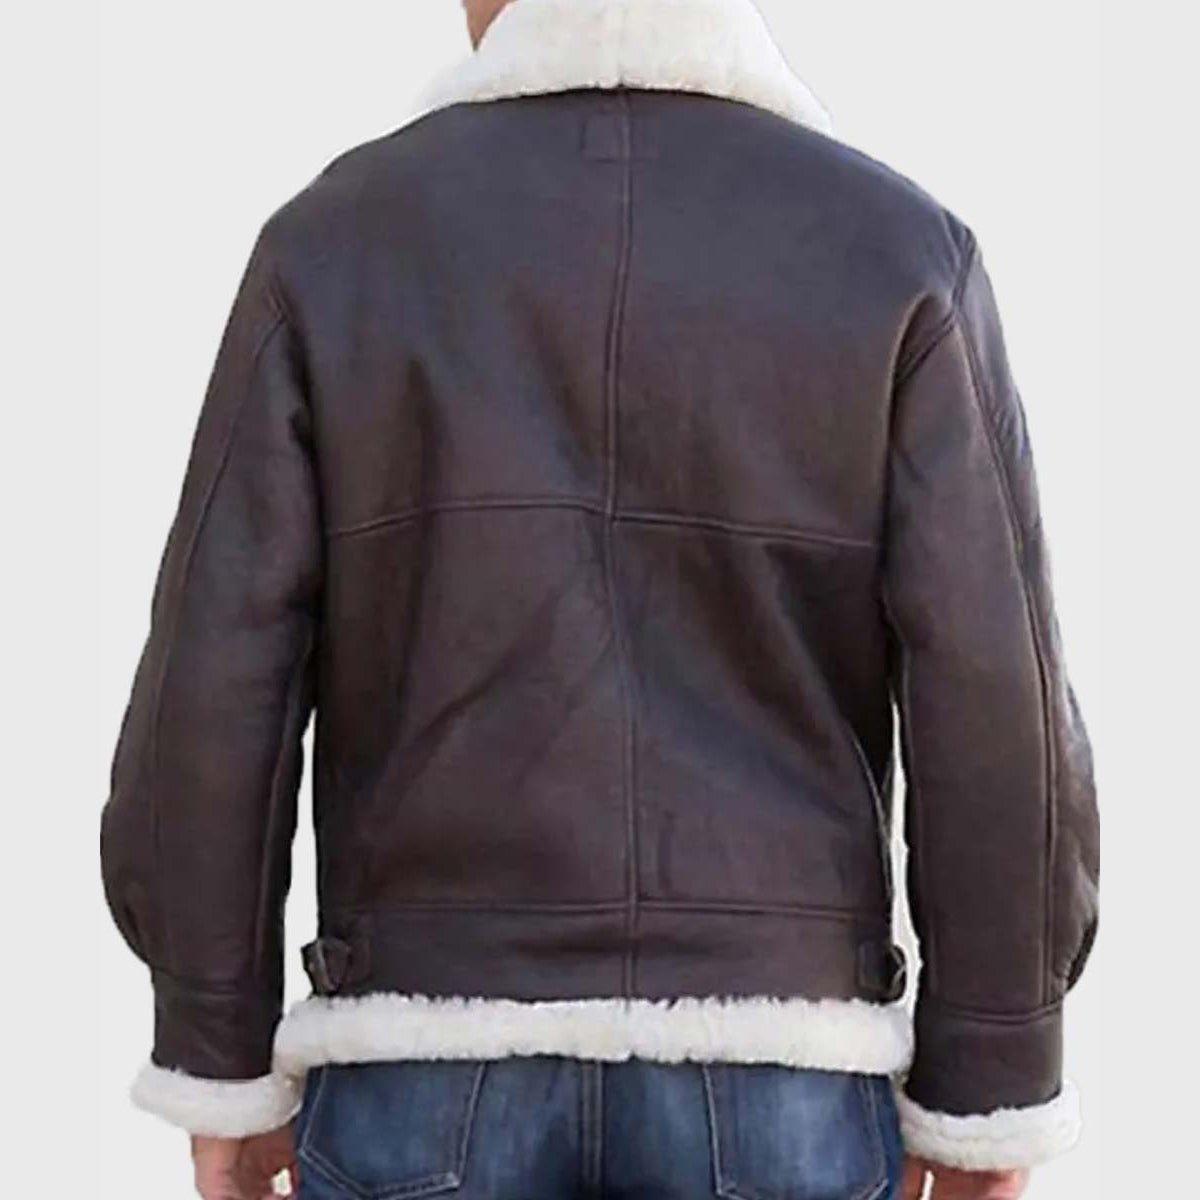 Sylvester Stallone Shearling Aviator Brown Leather Jacket